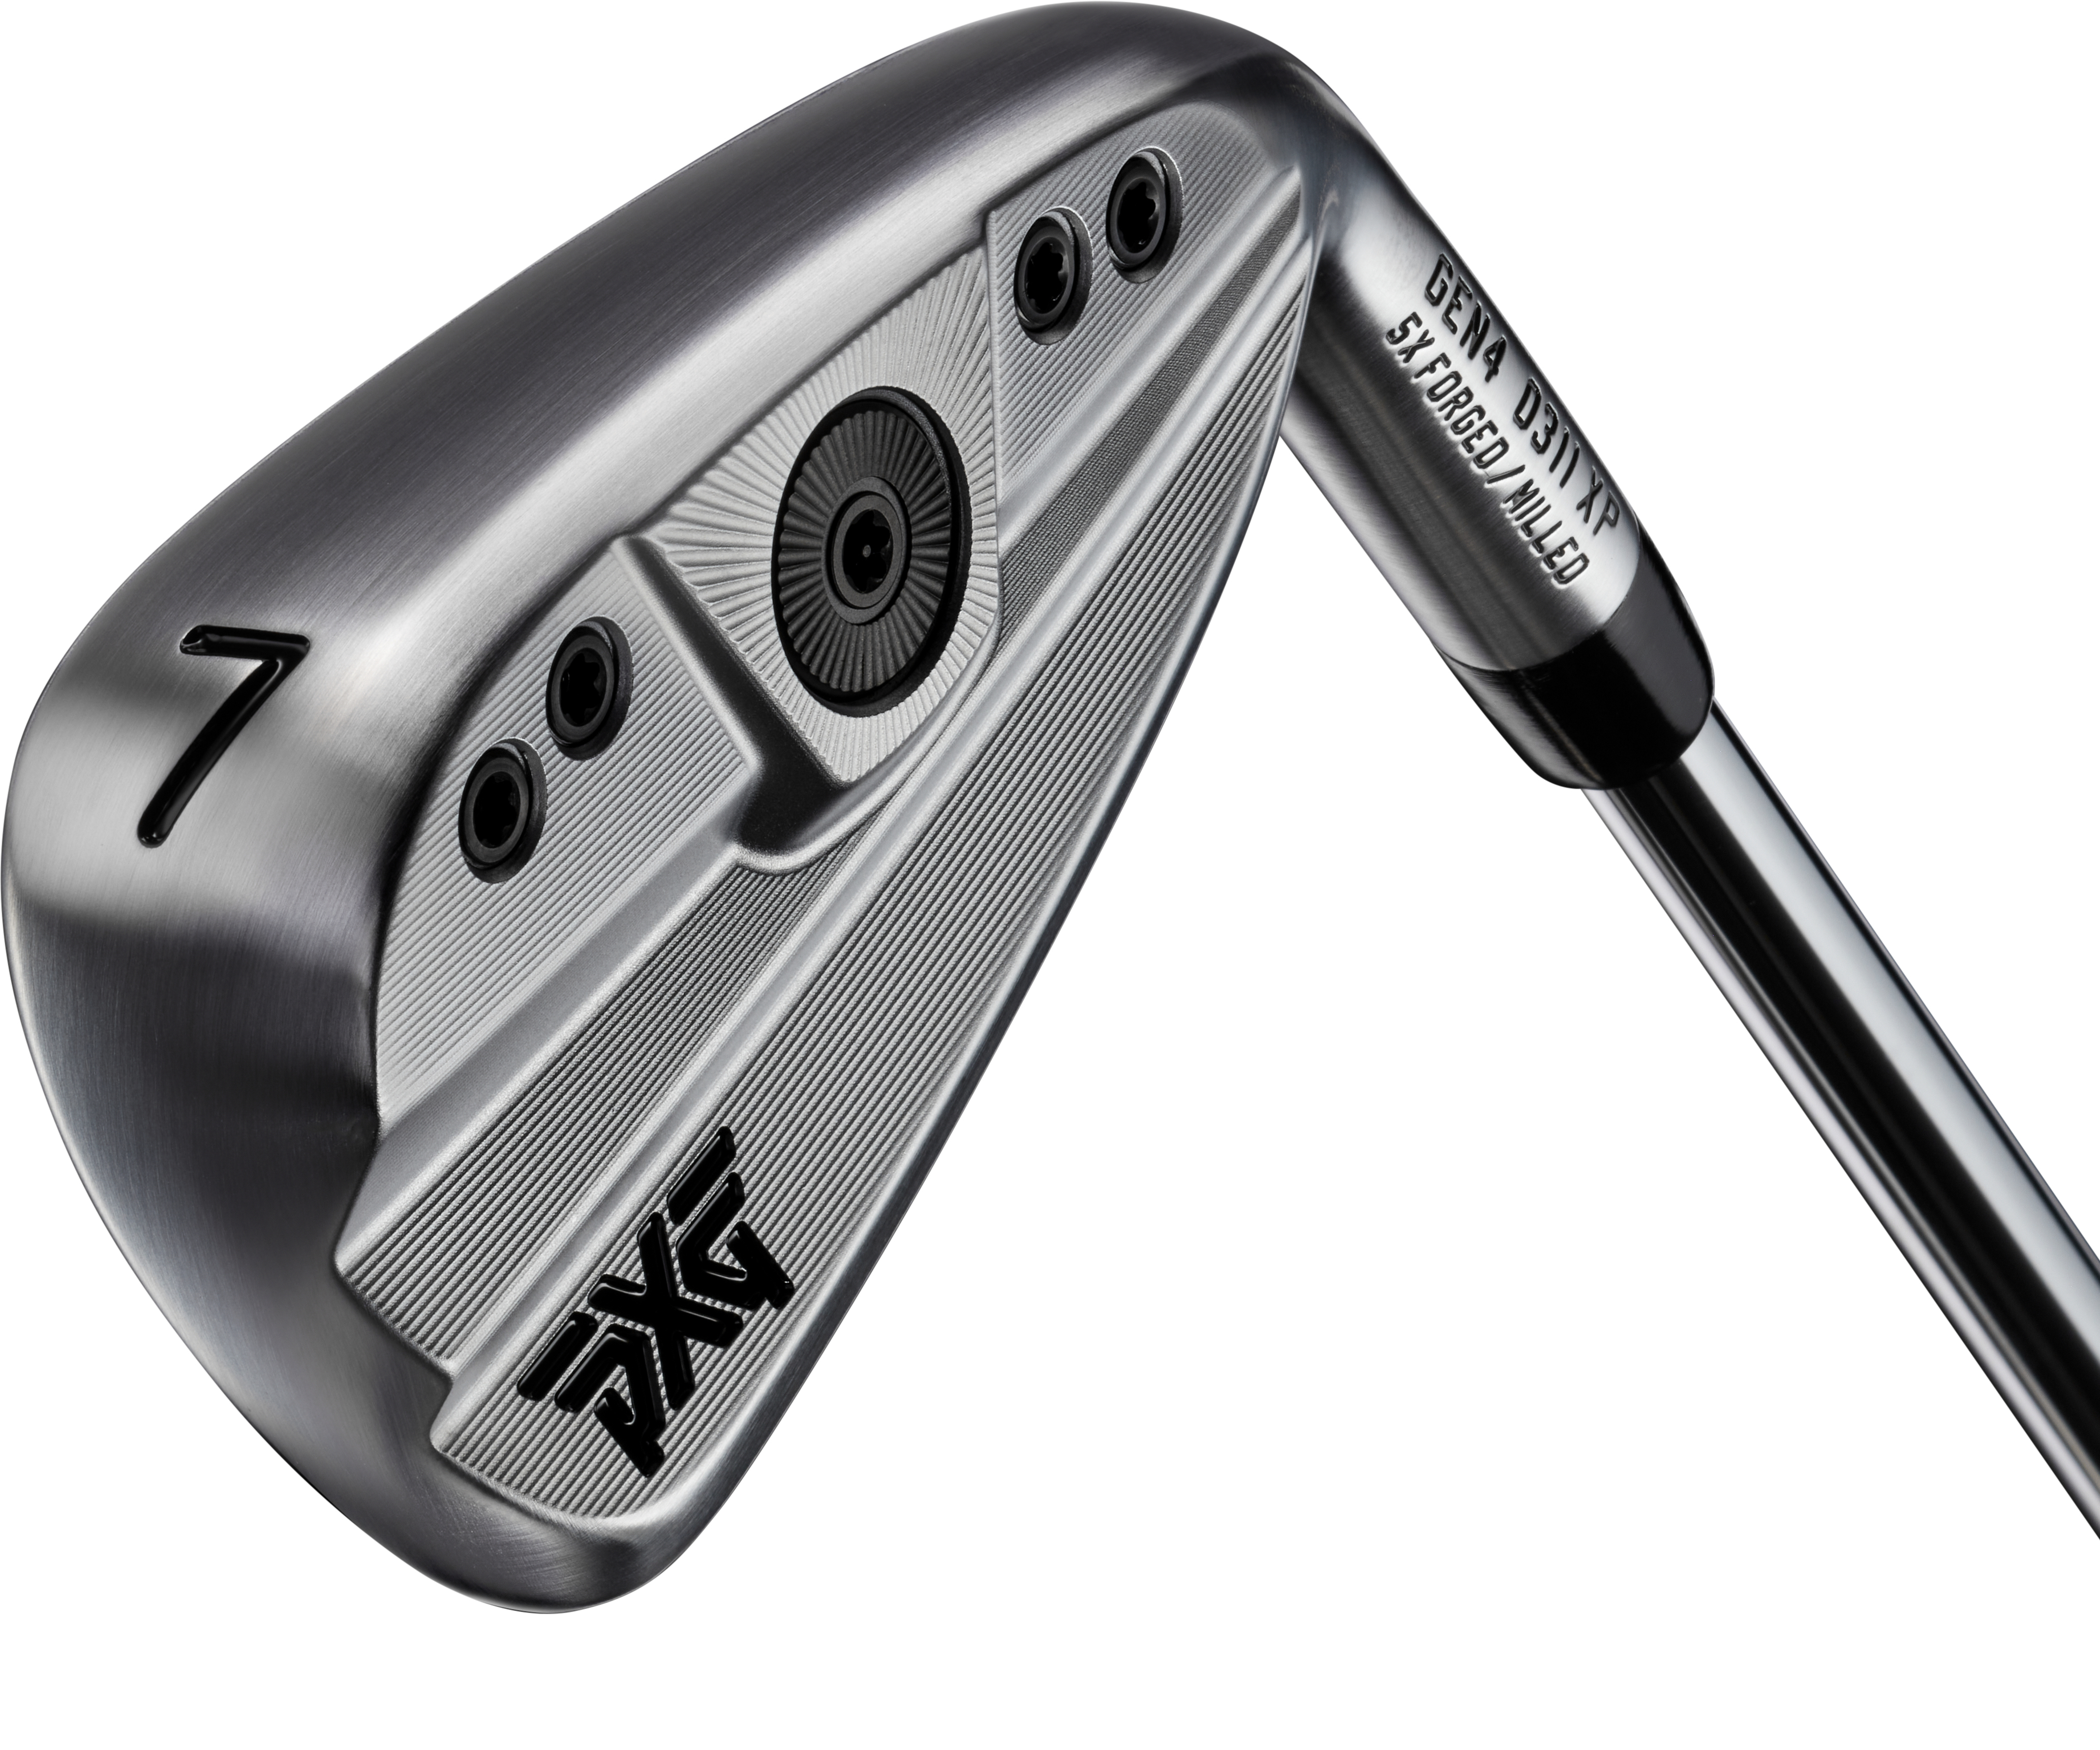 PXGs new GEN4 irons Heres everything you need to know Golf Equipment Clubs, Balls, Bags GolfDigest